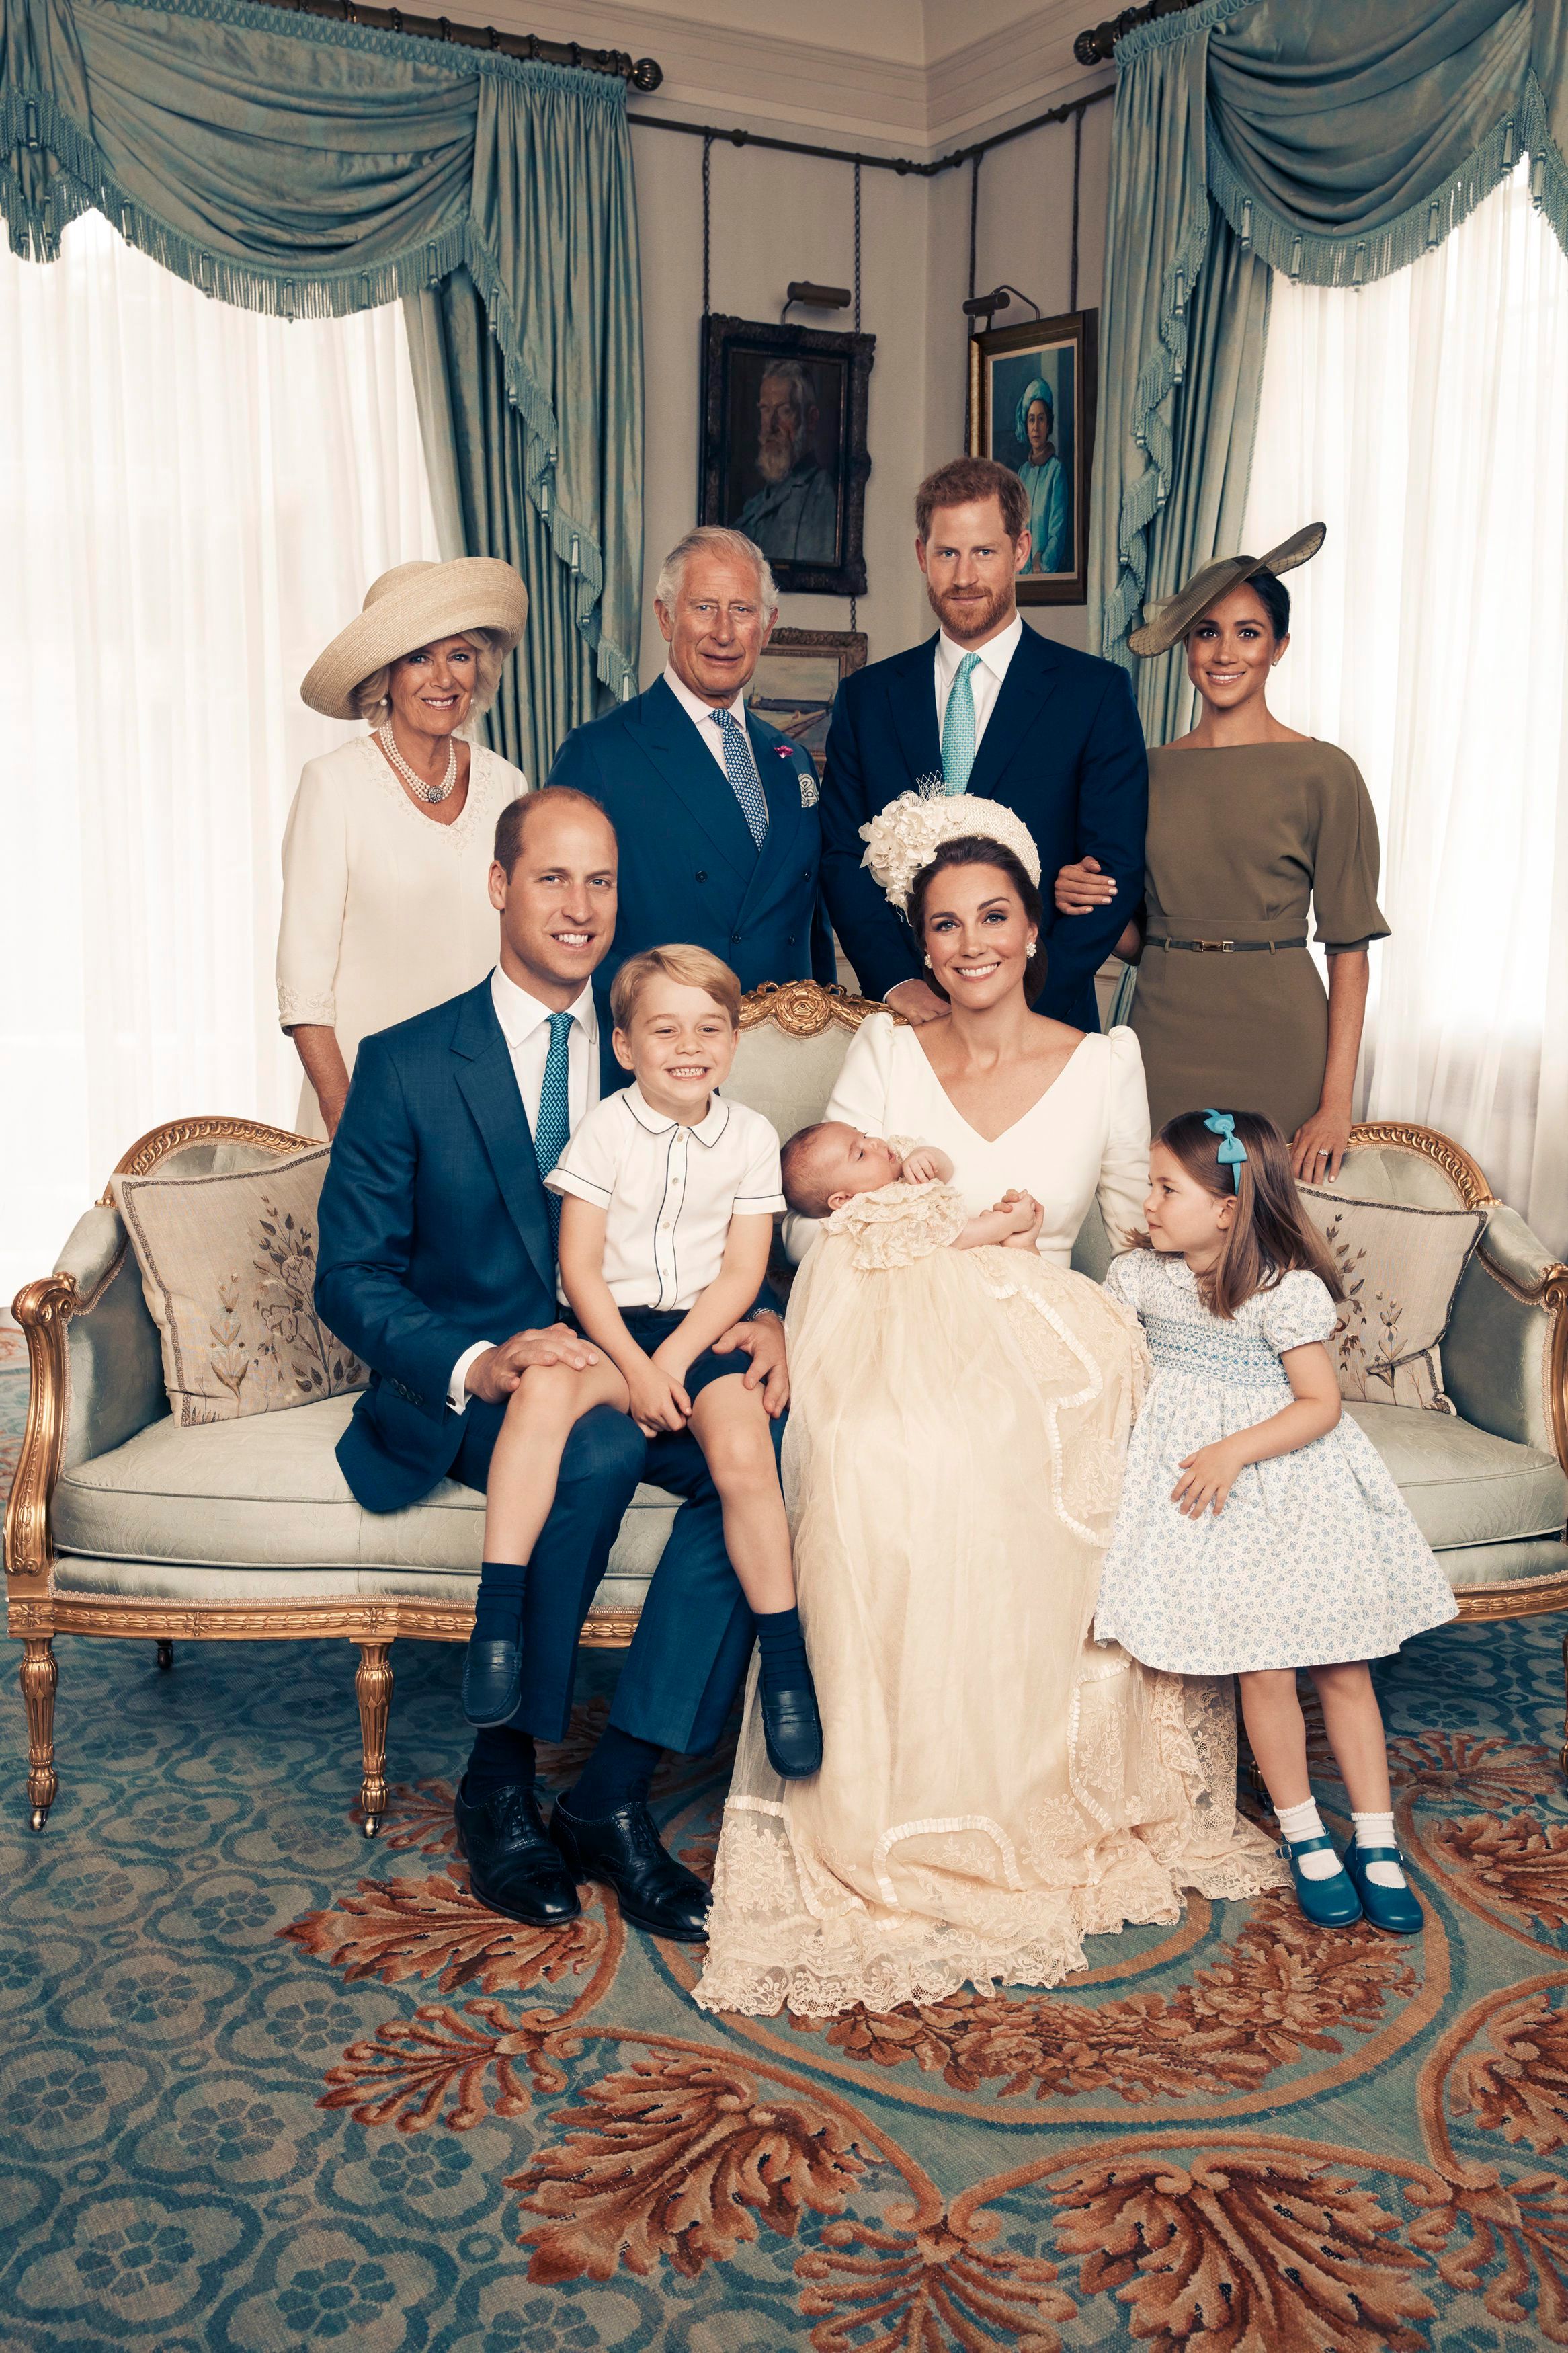 Royals Quiz: How Well Do You Actually Know The Royal Family? - Fame10